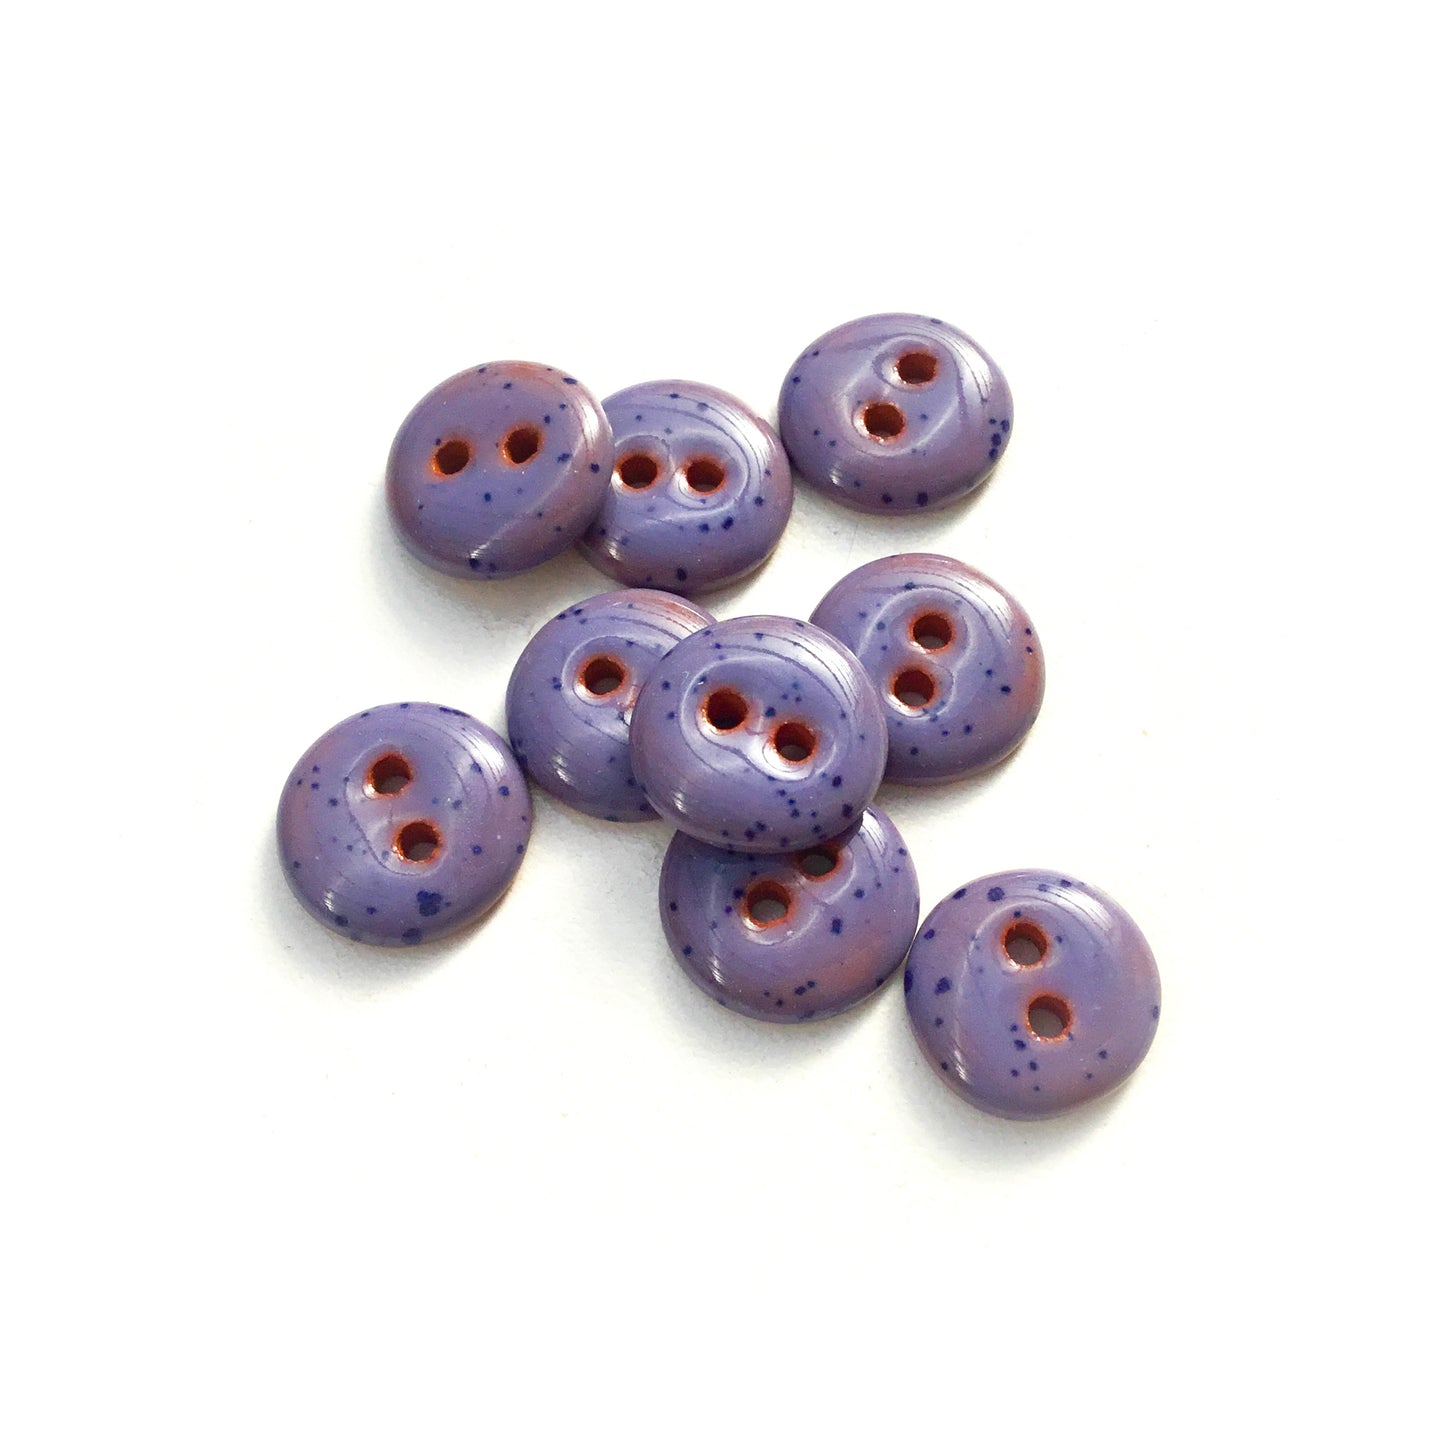 Speckled Purple Ceramic Buttons - Purple Clay Buttons - 9/16" - 9 Pack